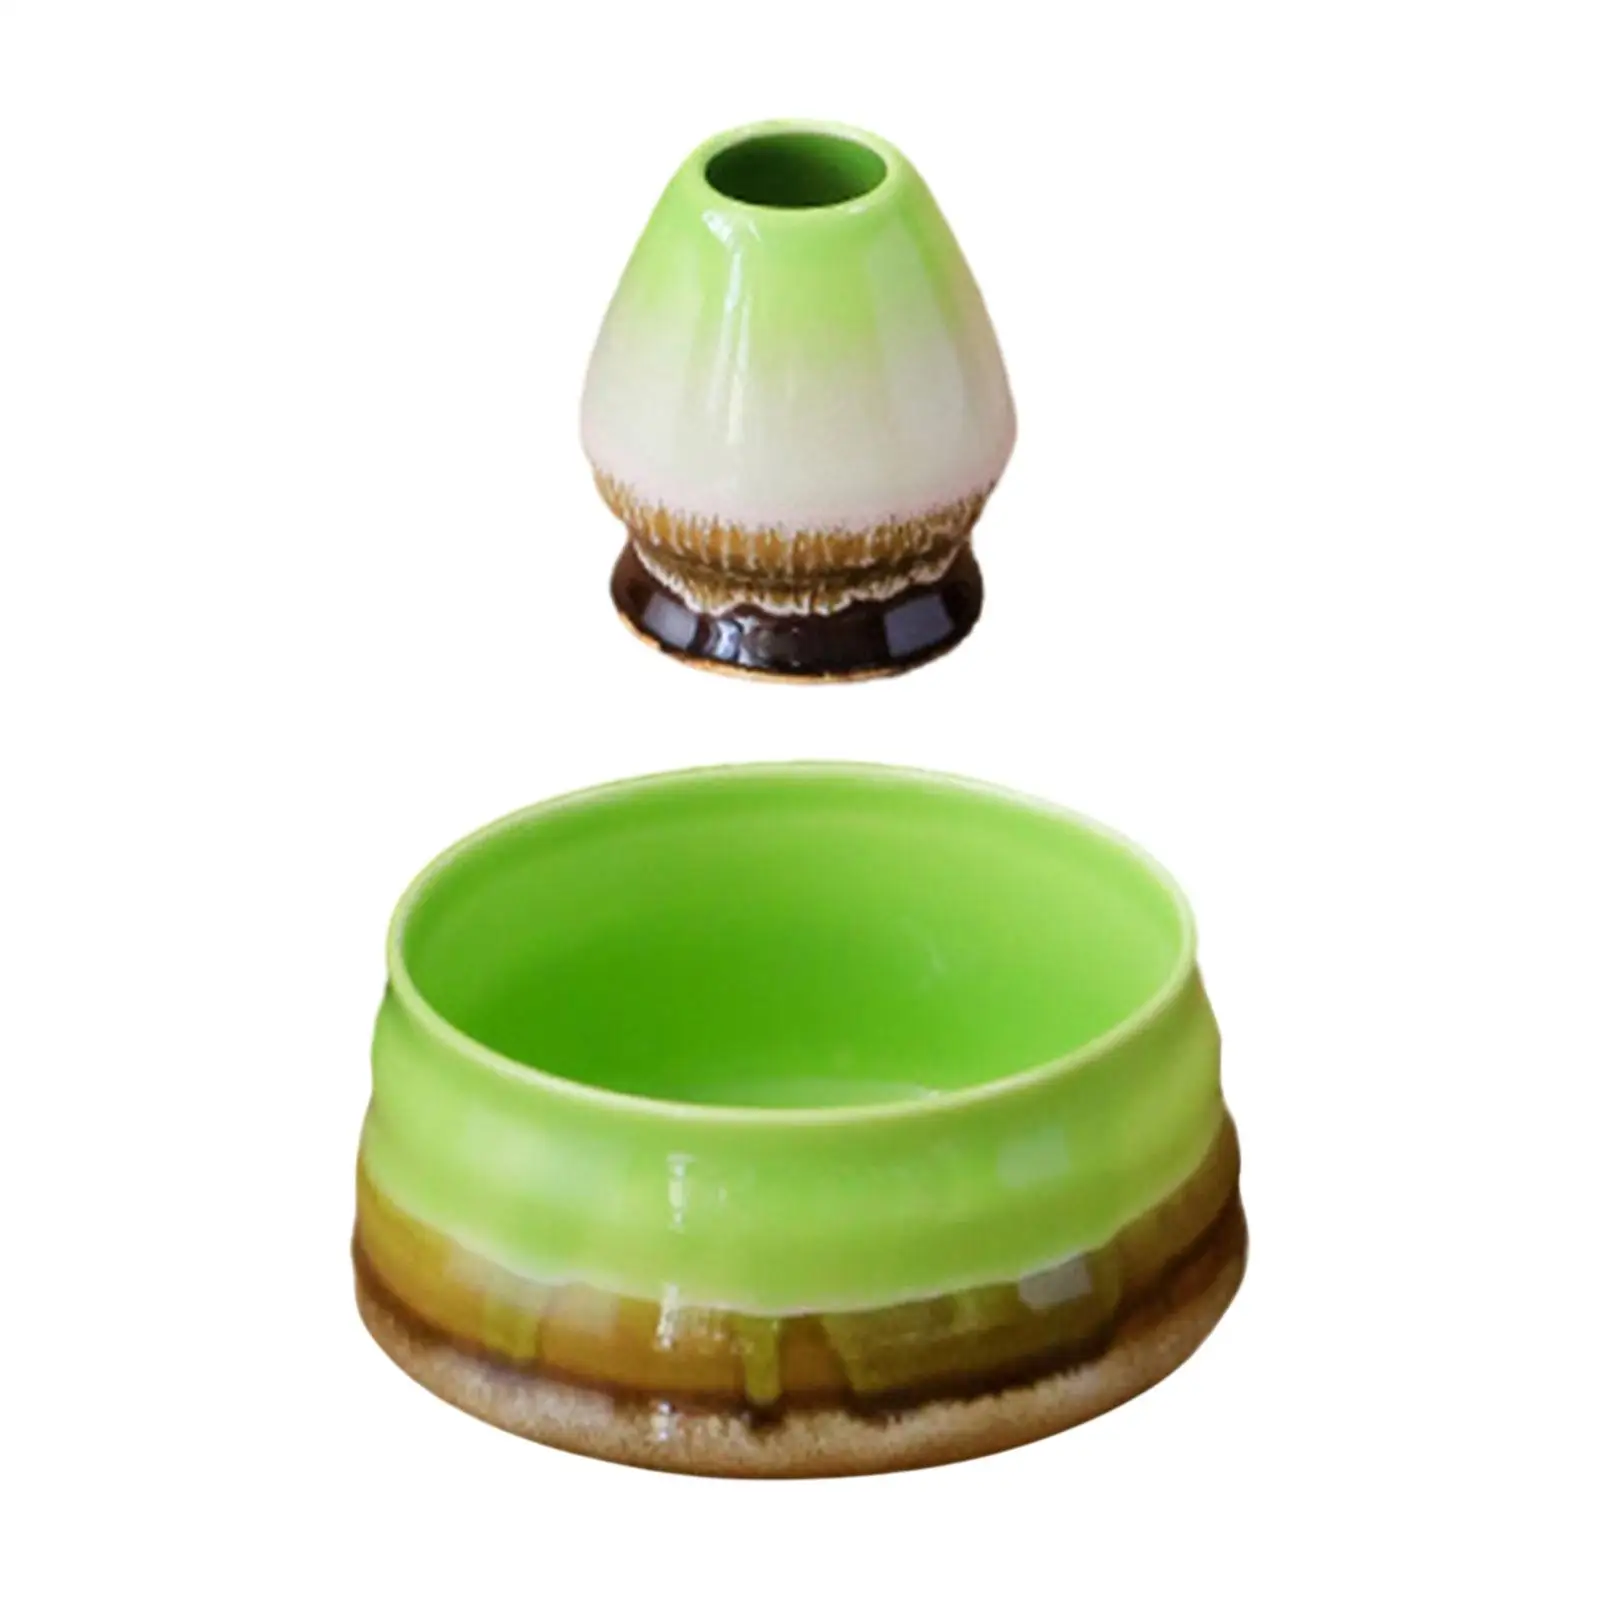 2 Pieces Traditional Matcha Bowl and Chasen Rest 500ml Whisk Tea Bowl for Tea Lovers Japanese Matcha Preparation Beverage Family